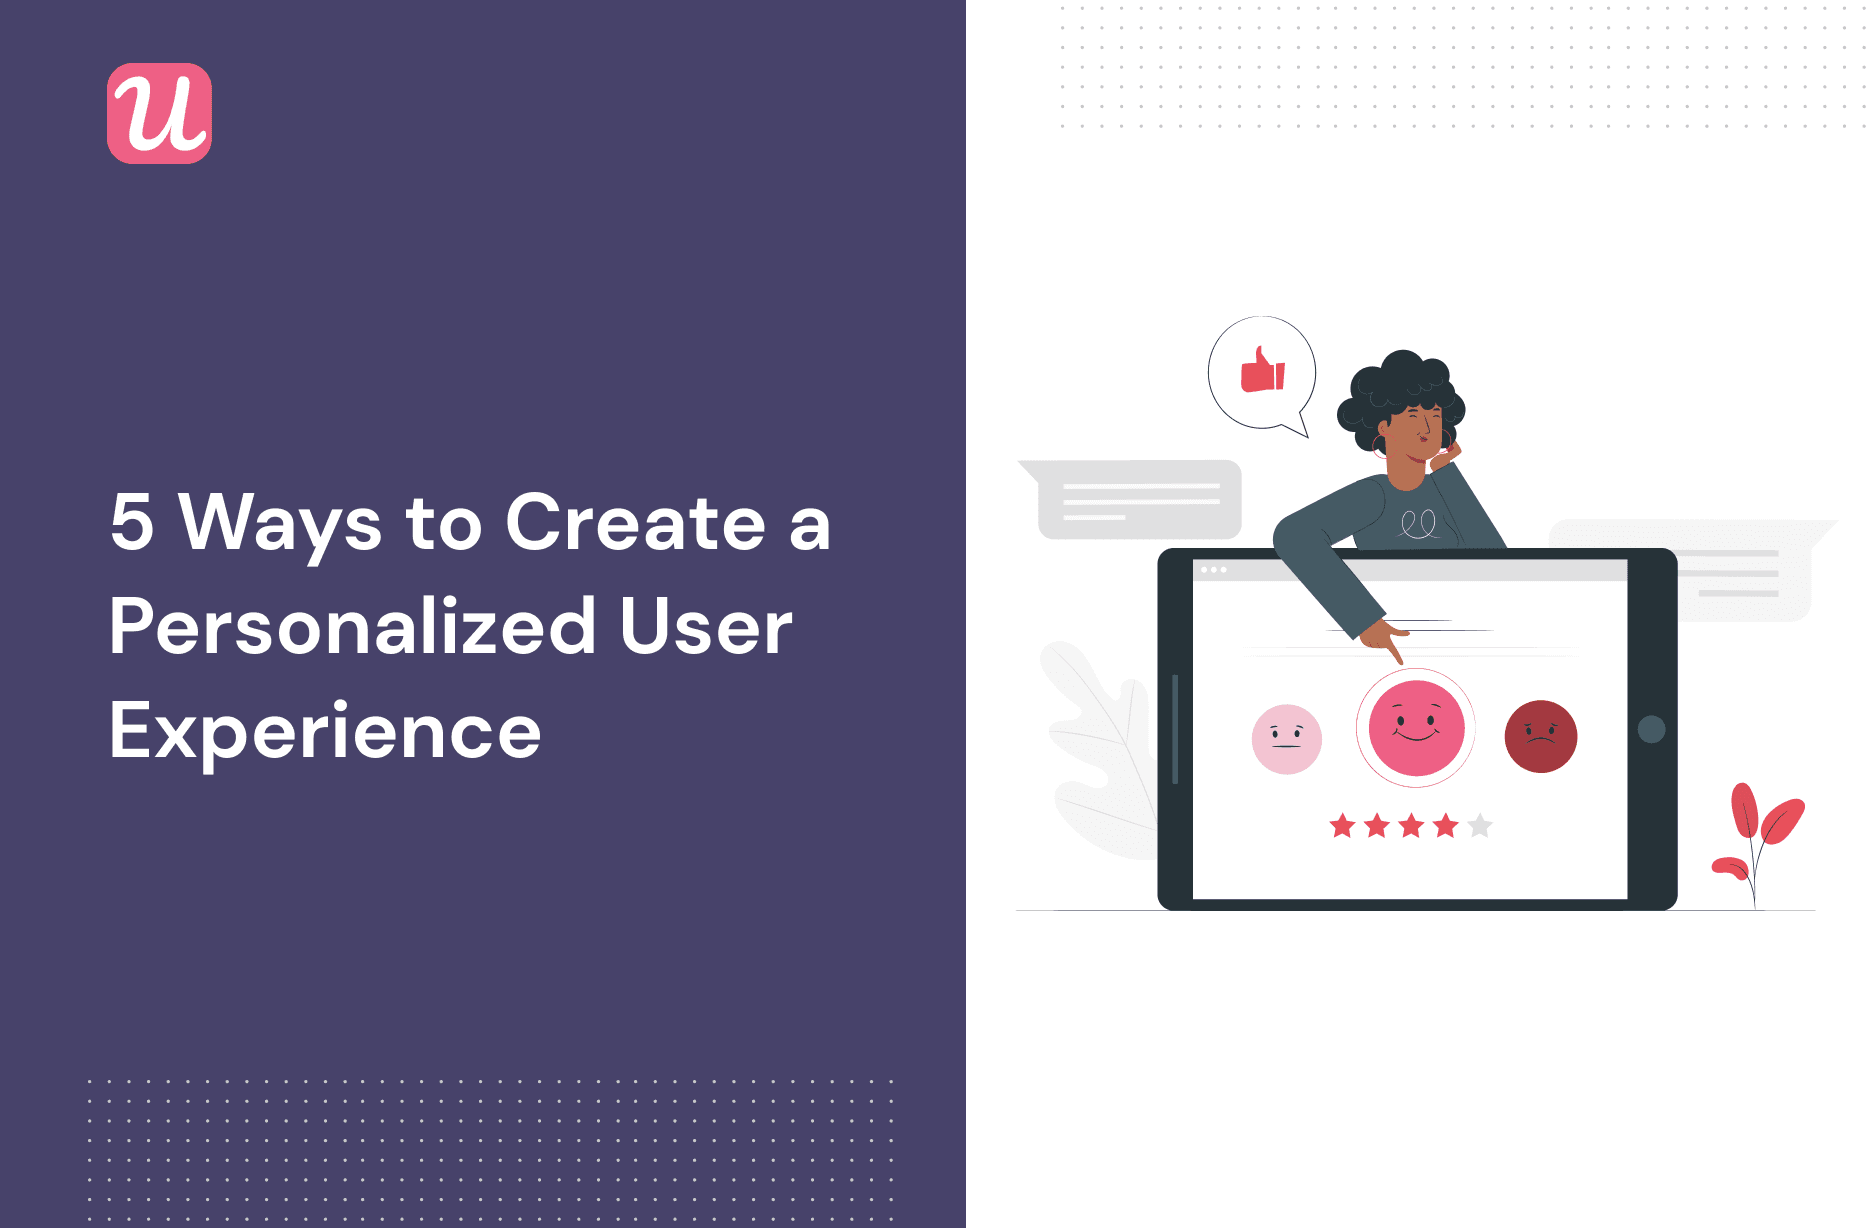 5 Ways to Create a Personalized User Experience